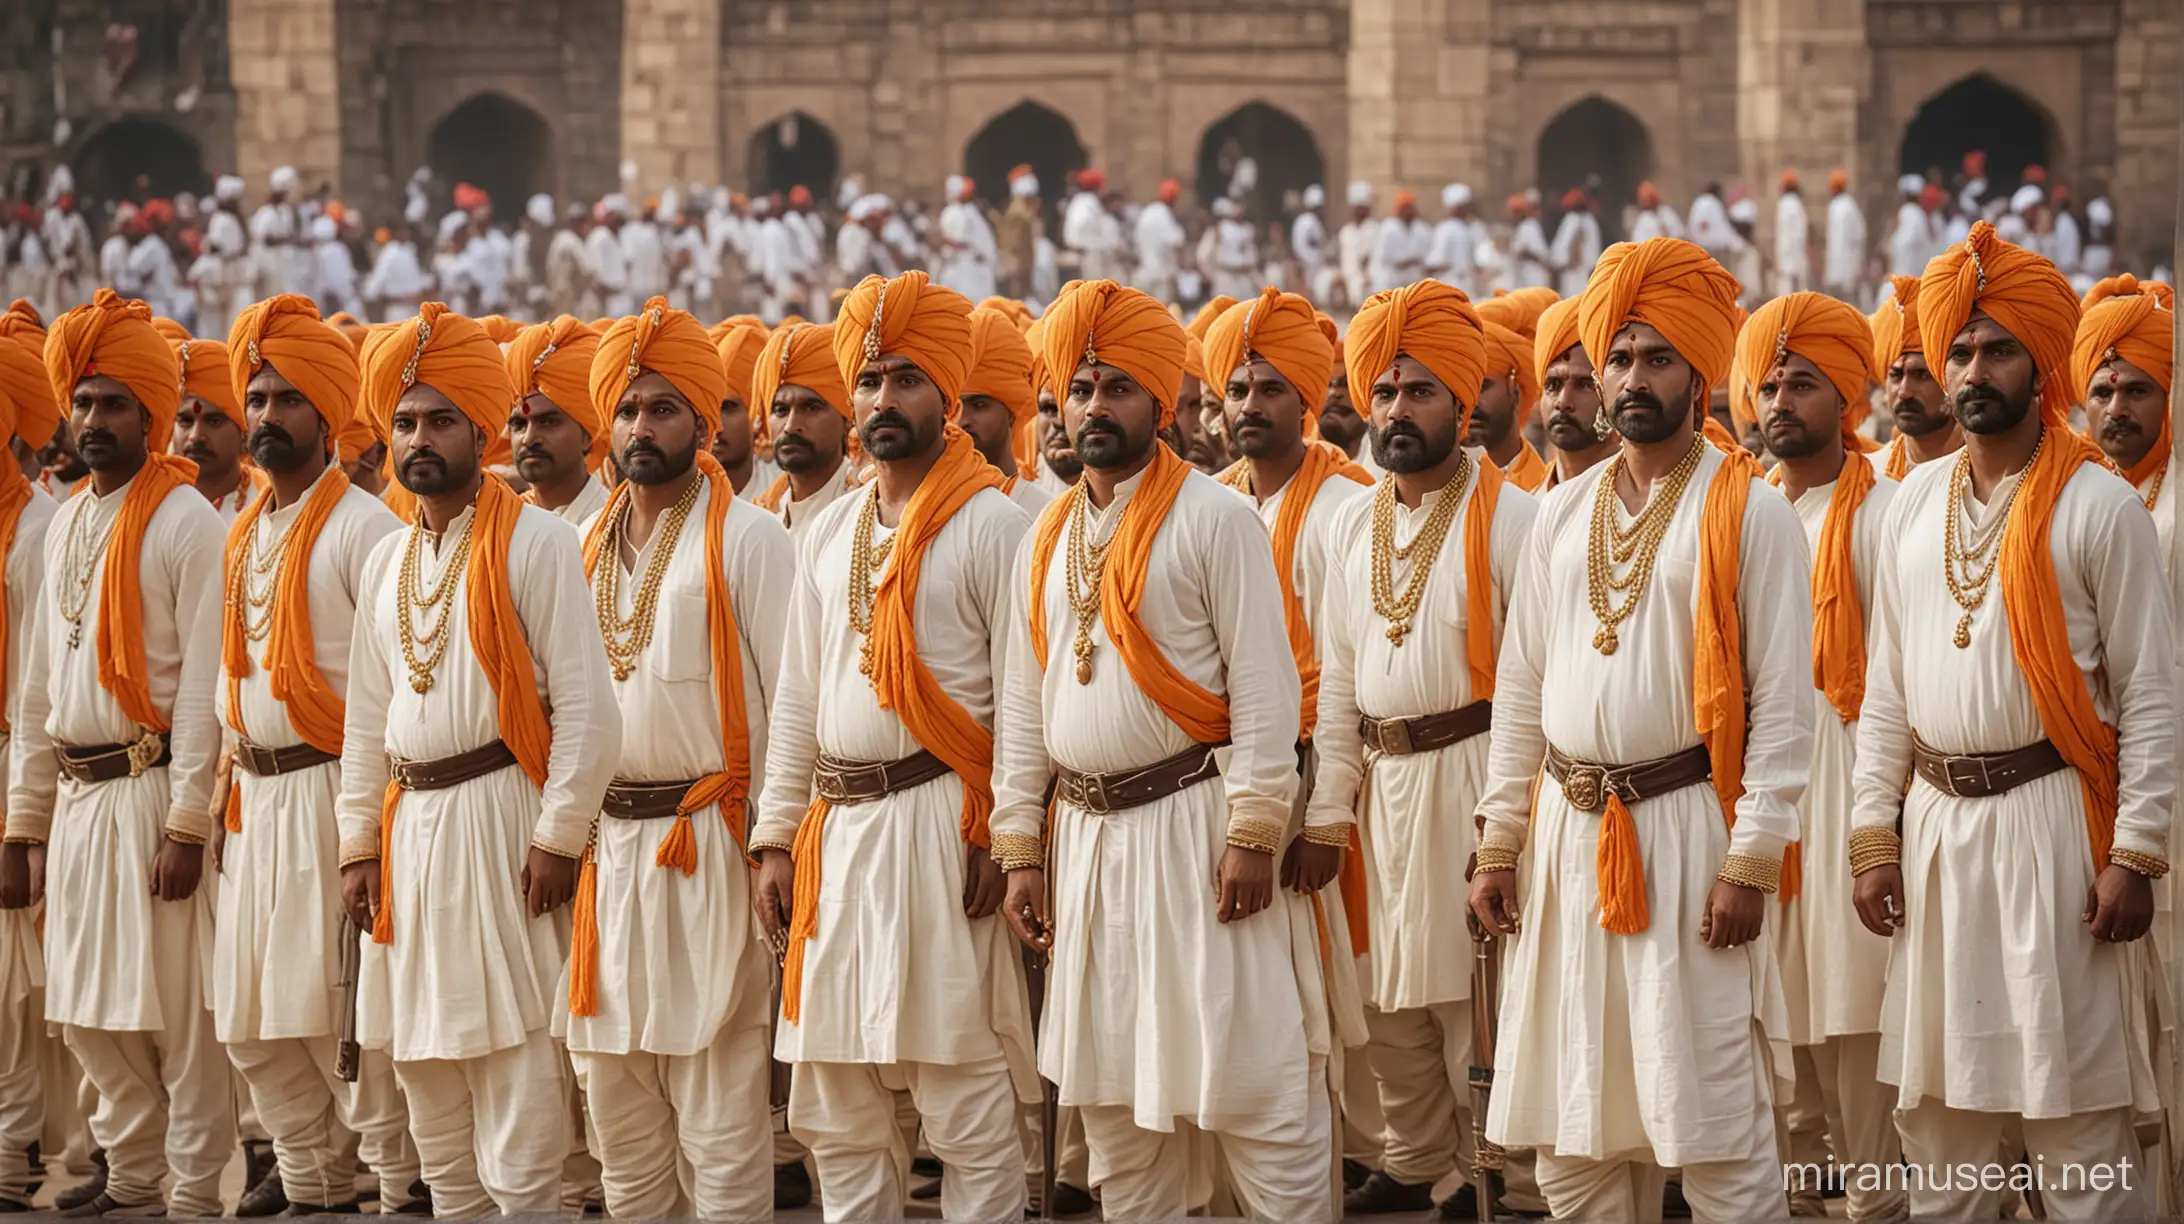 Create an image of many 17th century Maratha soldiers wearing white clothes and saffron turbansstanding in a durbar. Line after line as they slowly fade into background.
